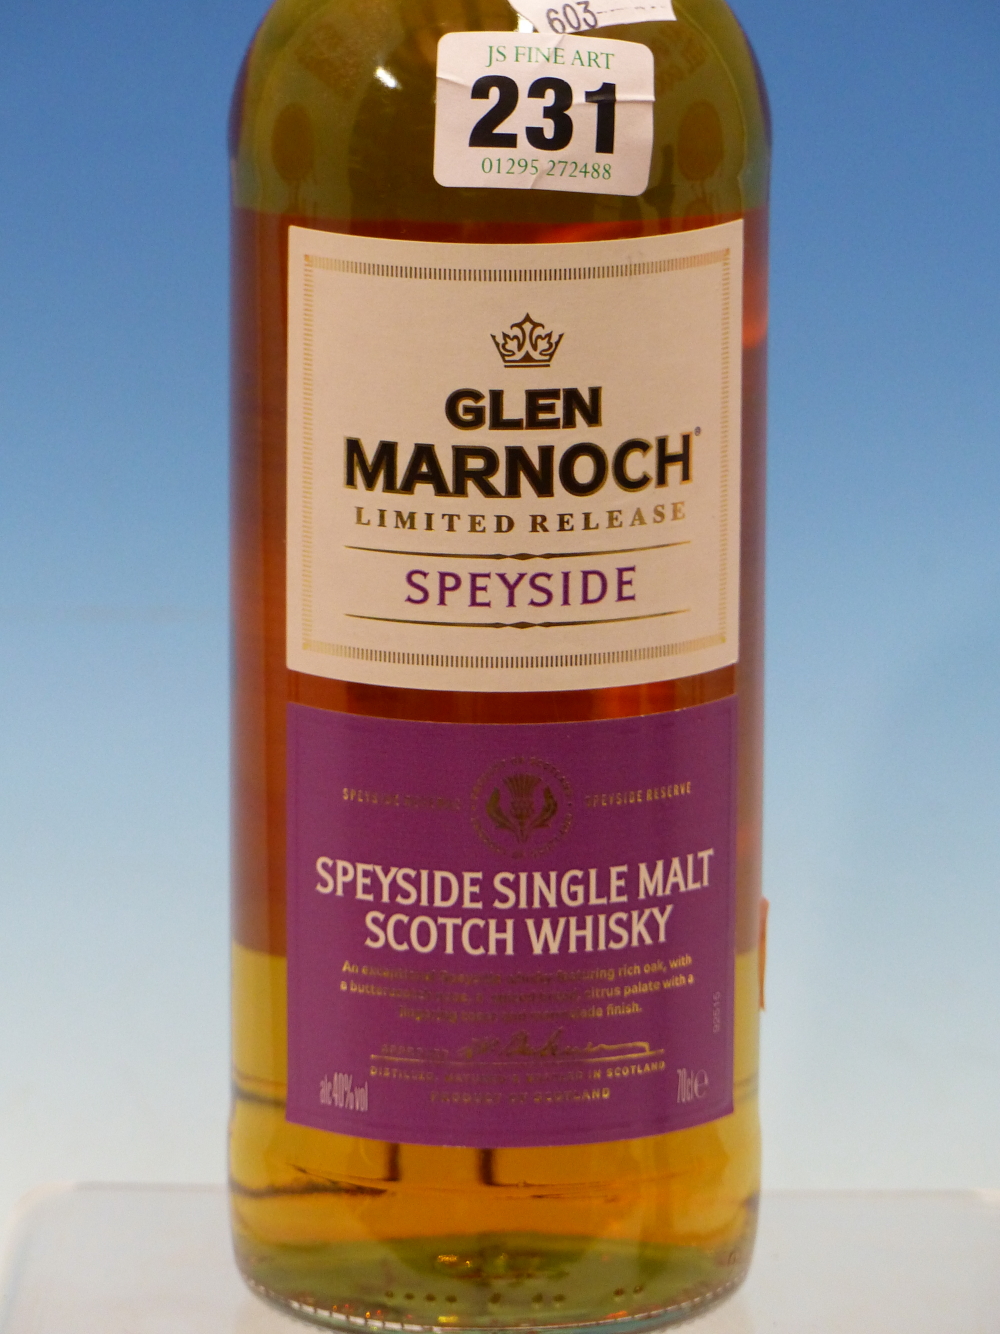 WHISKY. GLENMARNOCH SPEYSIDE LIMITED RELEASE, 1 x BOTTLE. (1) - Image 4 of 4